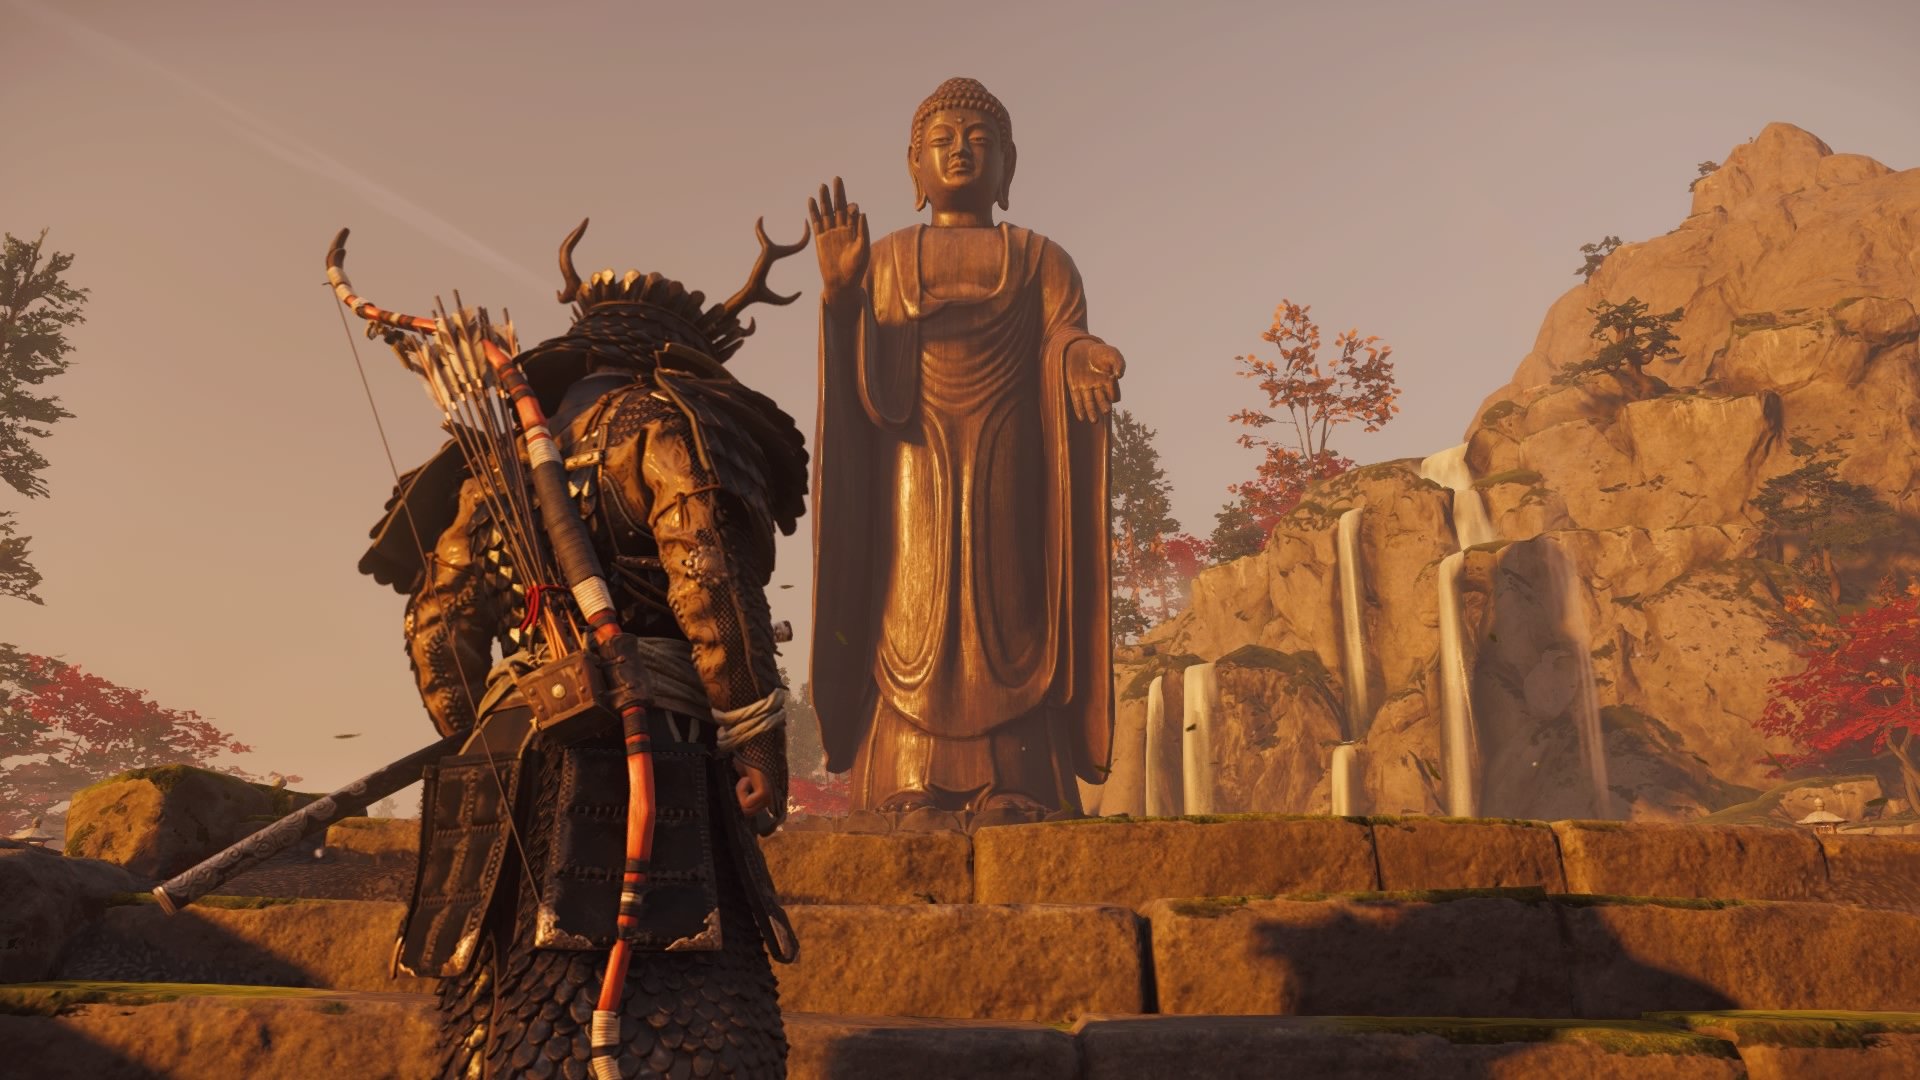 Ghost of Tsushima Review: A Stylish Samurai Tale - Fextralife